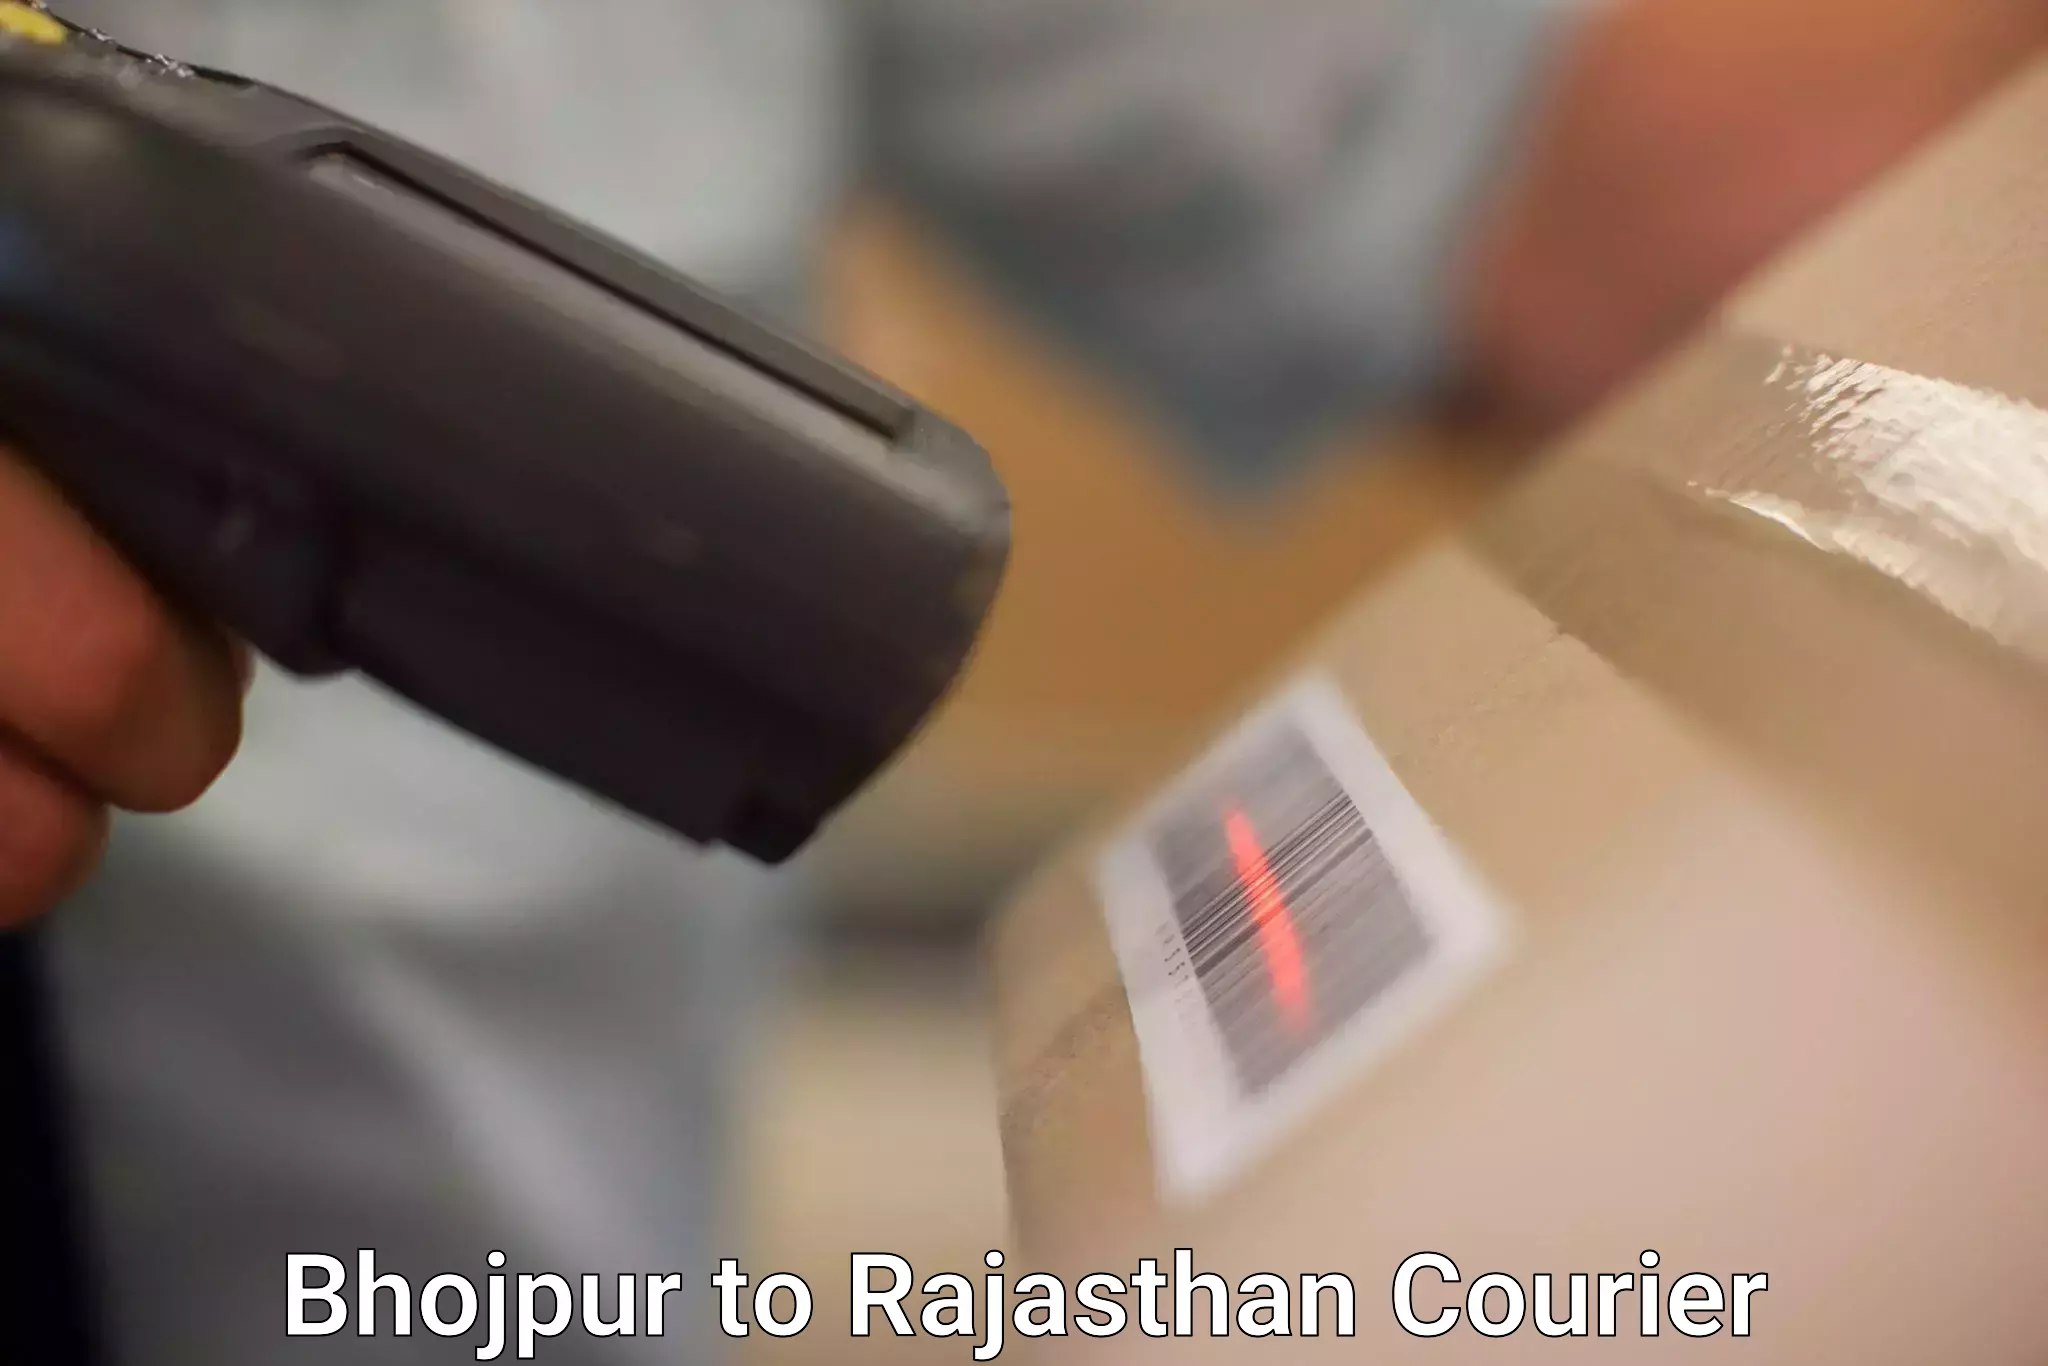 On-call courier service Bhojpur to Laxmangarh